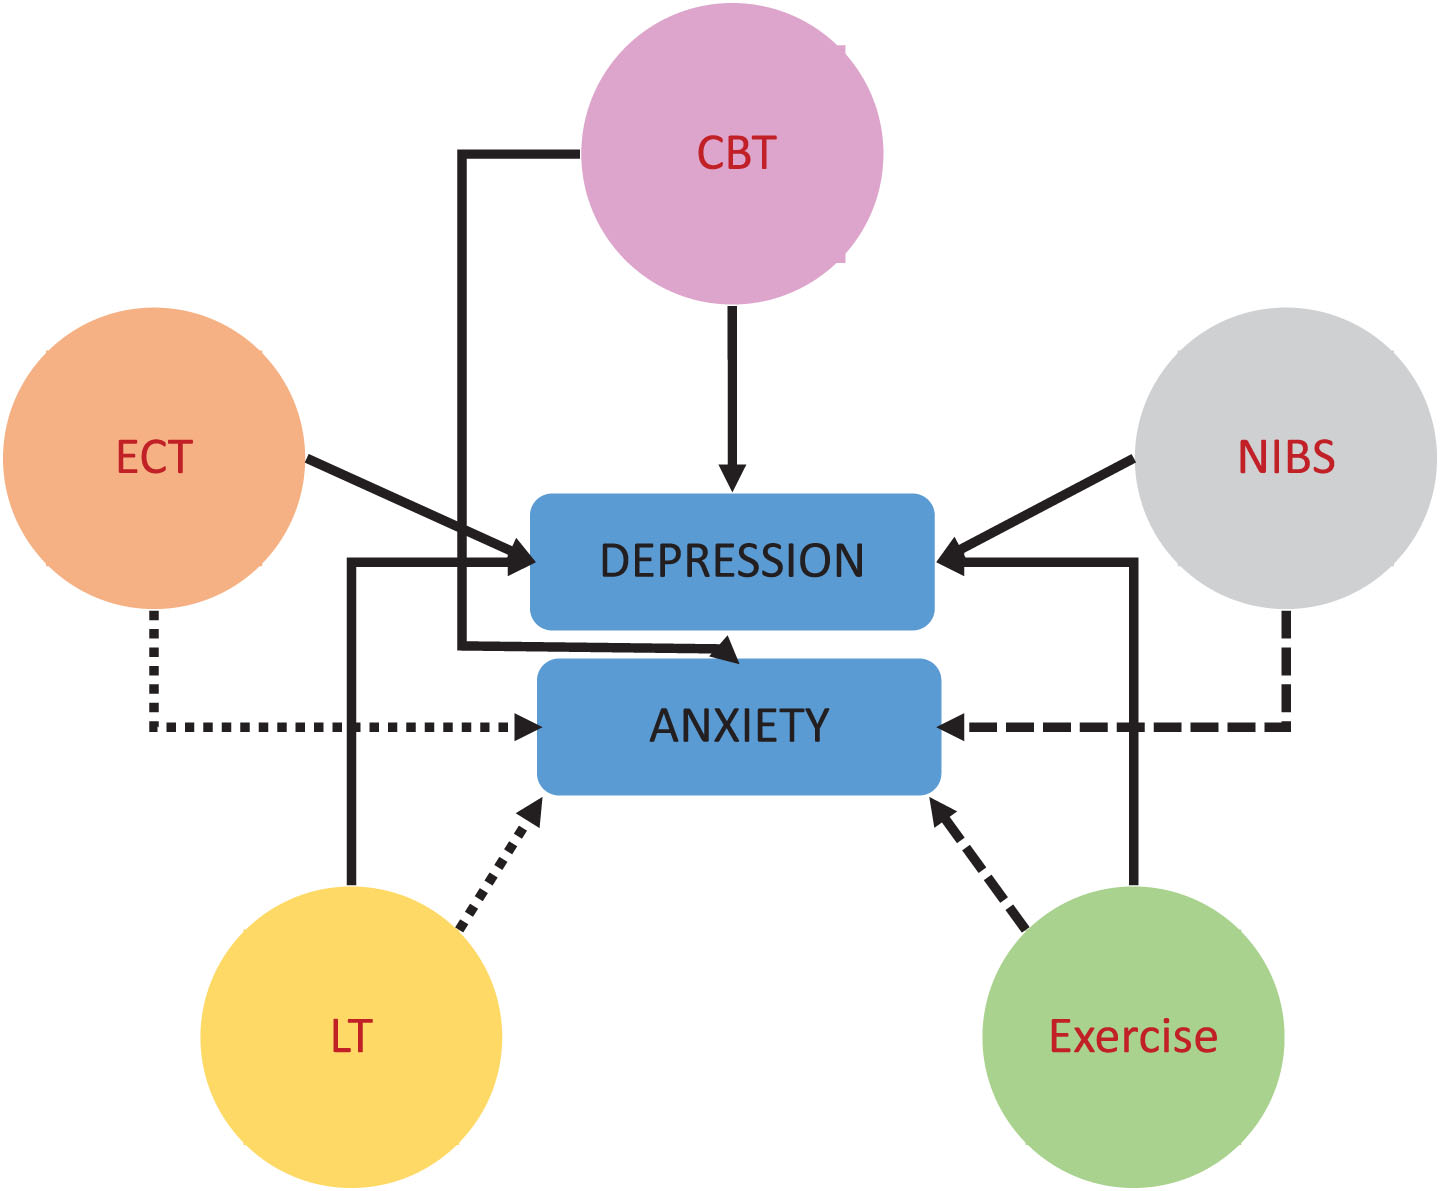 Non-pharmacological interventions for depression and anxiety in PD. Cognitive Behavioral Therapy (CBT), Electroconvulsive Therapy (ECT), Non-Invasive Brain Stimulation (NIBS, e.g., (r)TMS, tDCS), Light Therapy (LT); Exercise (Physical Activity). Solid lines: at least moderate evidence for an association, rough dashed lines (LT/NIBS/Exercise –anxiety): limited or no evidence, fine dashed line (ECT/LT –anxiety): not studied/not indicated.